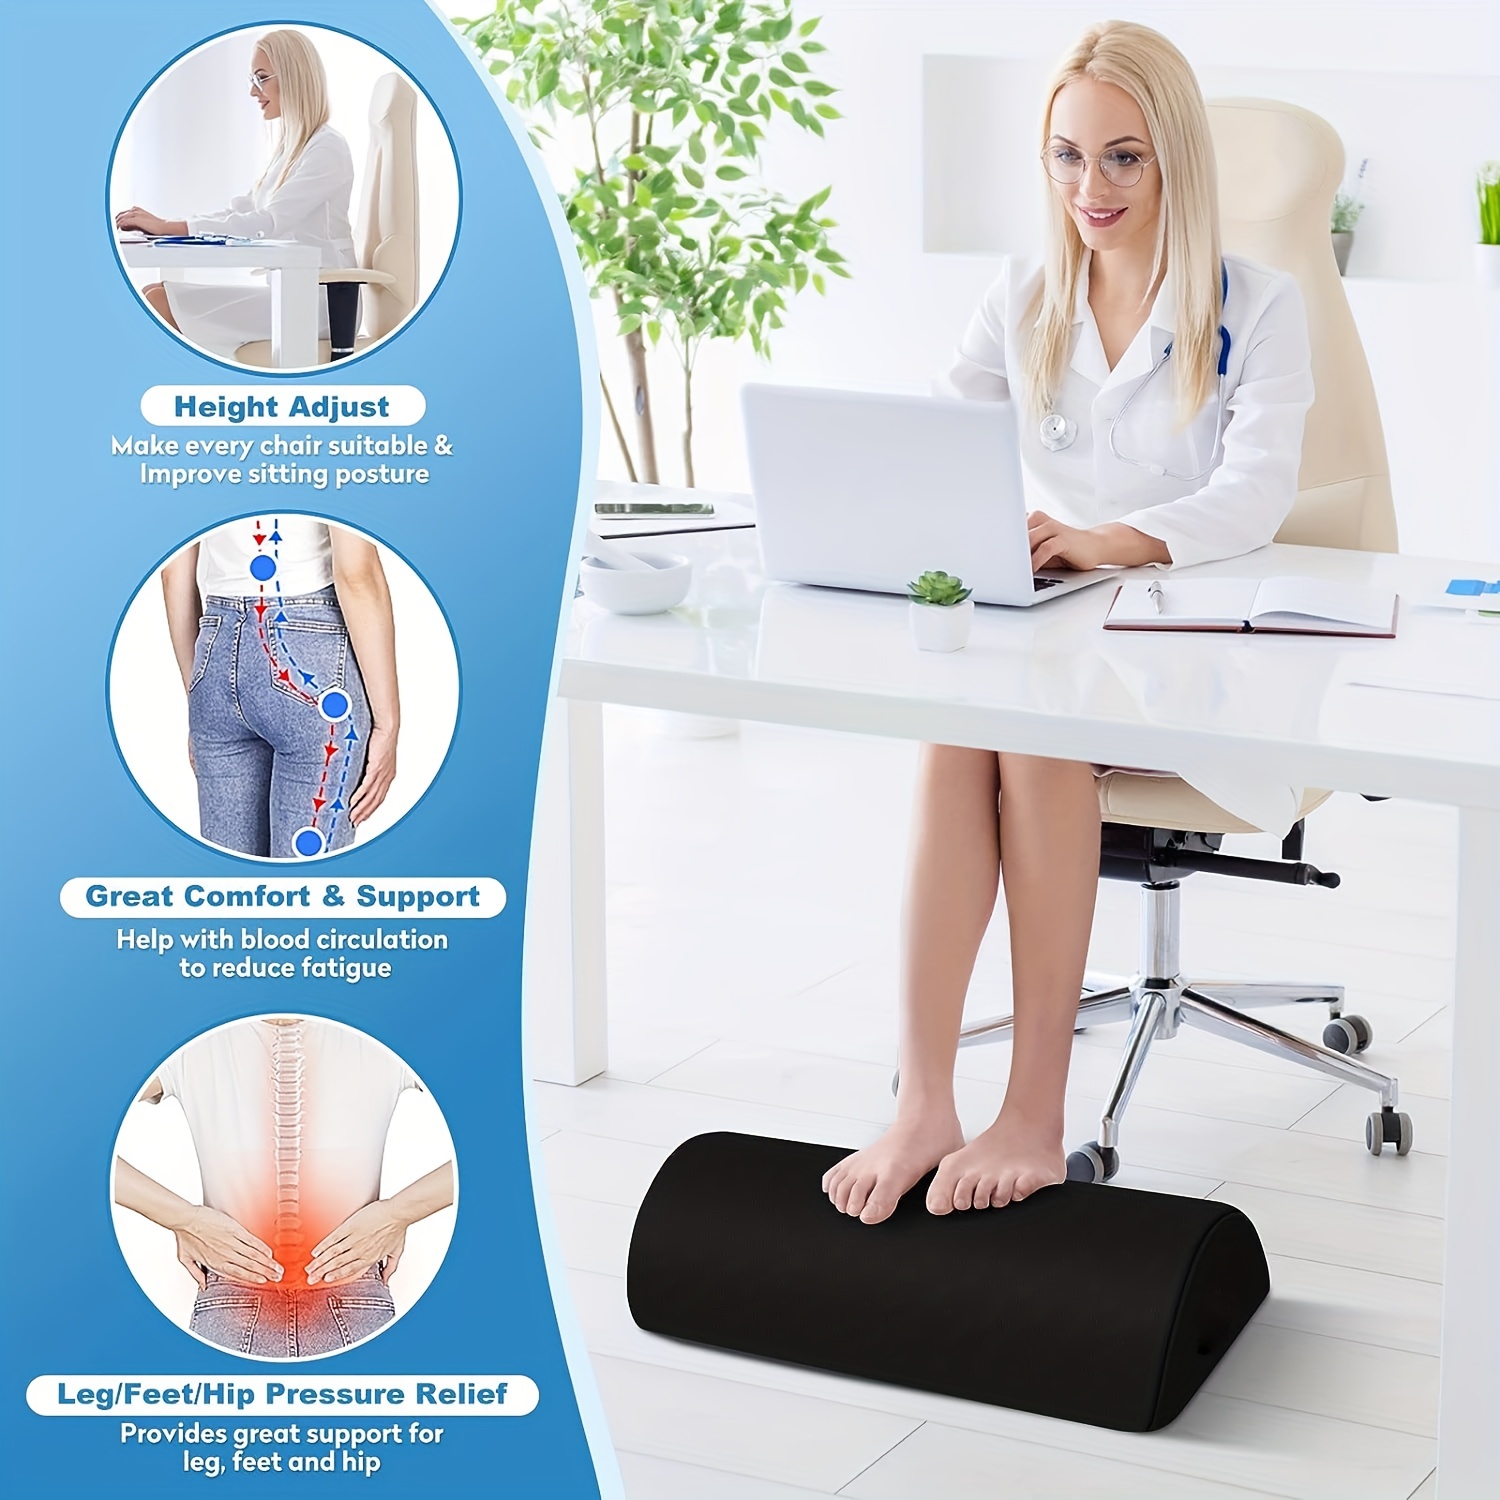 Ergonomic Memory Foam Foot Rest For Under Desk - Relieve Back & Hip Pain  While Working Or Gaming! - Temu